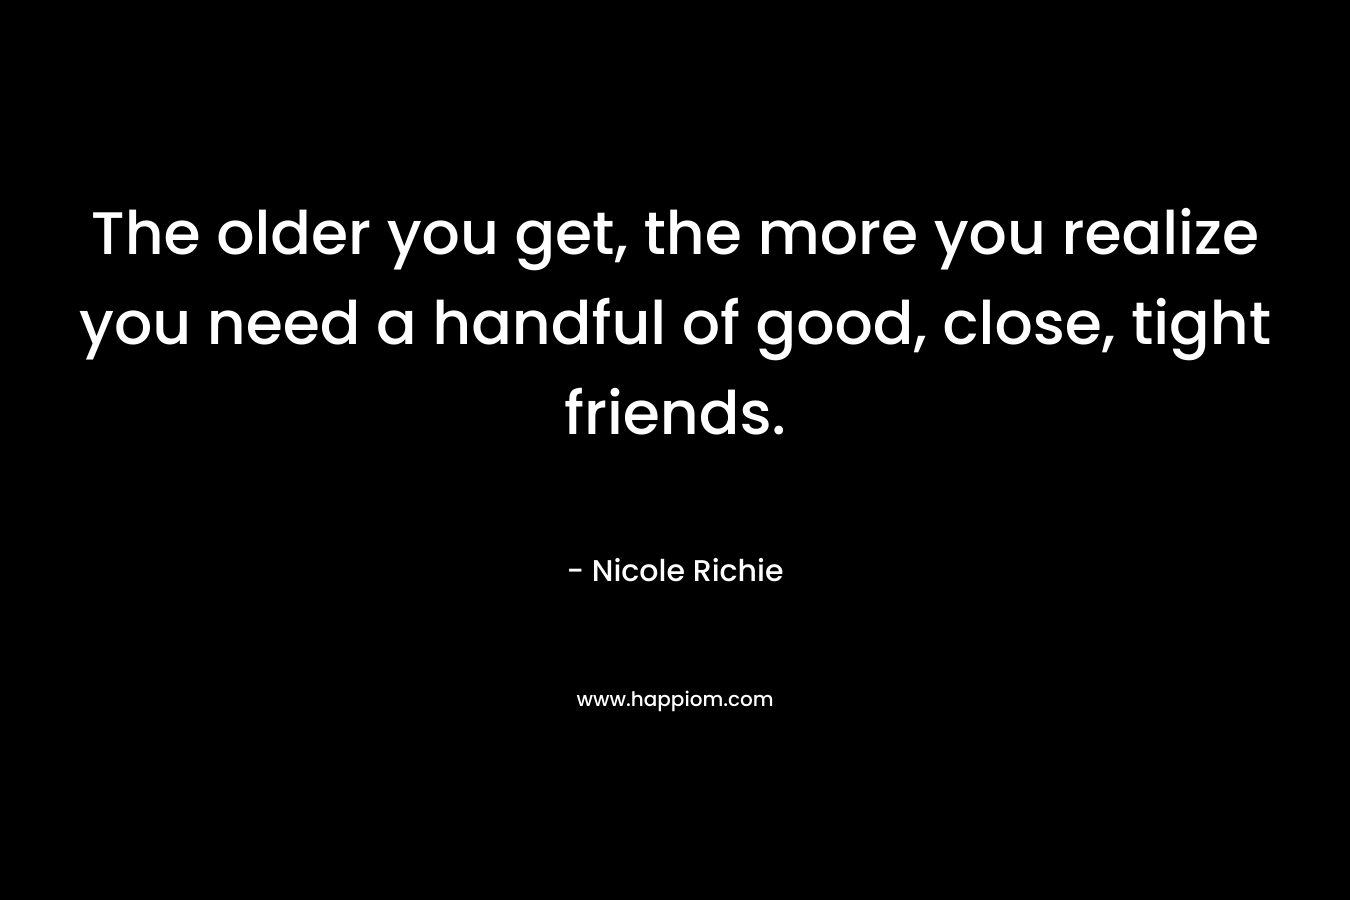 The older you get, the more you realize you need a handful of good, close, tight friends.